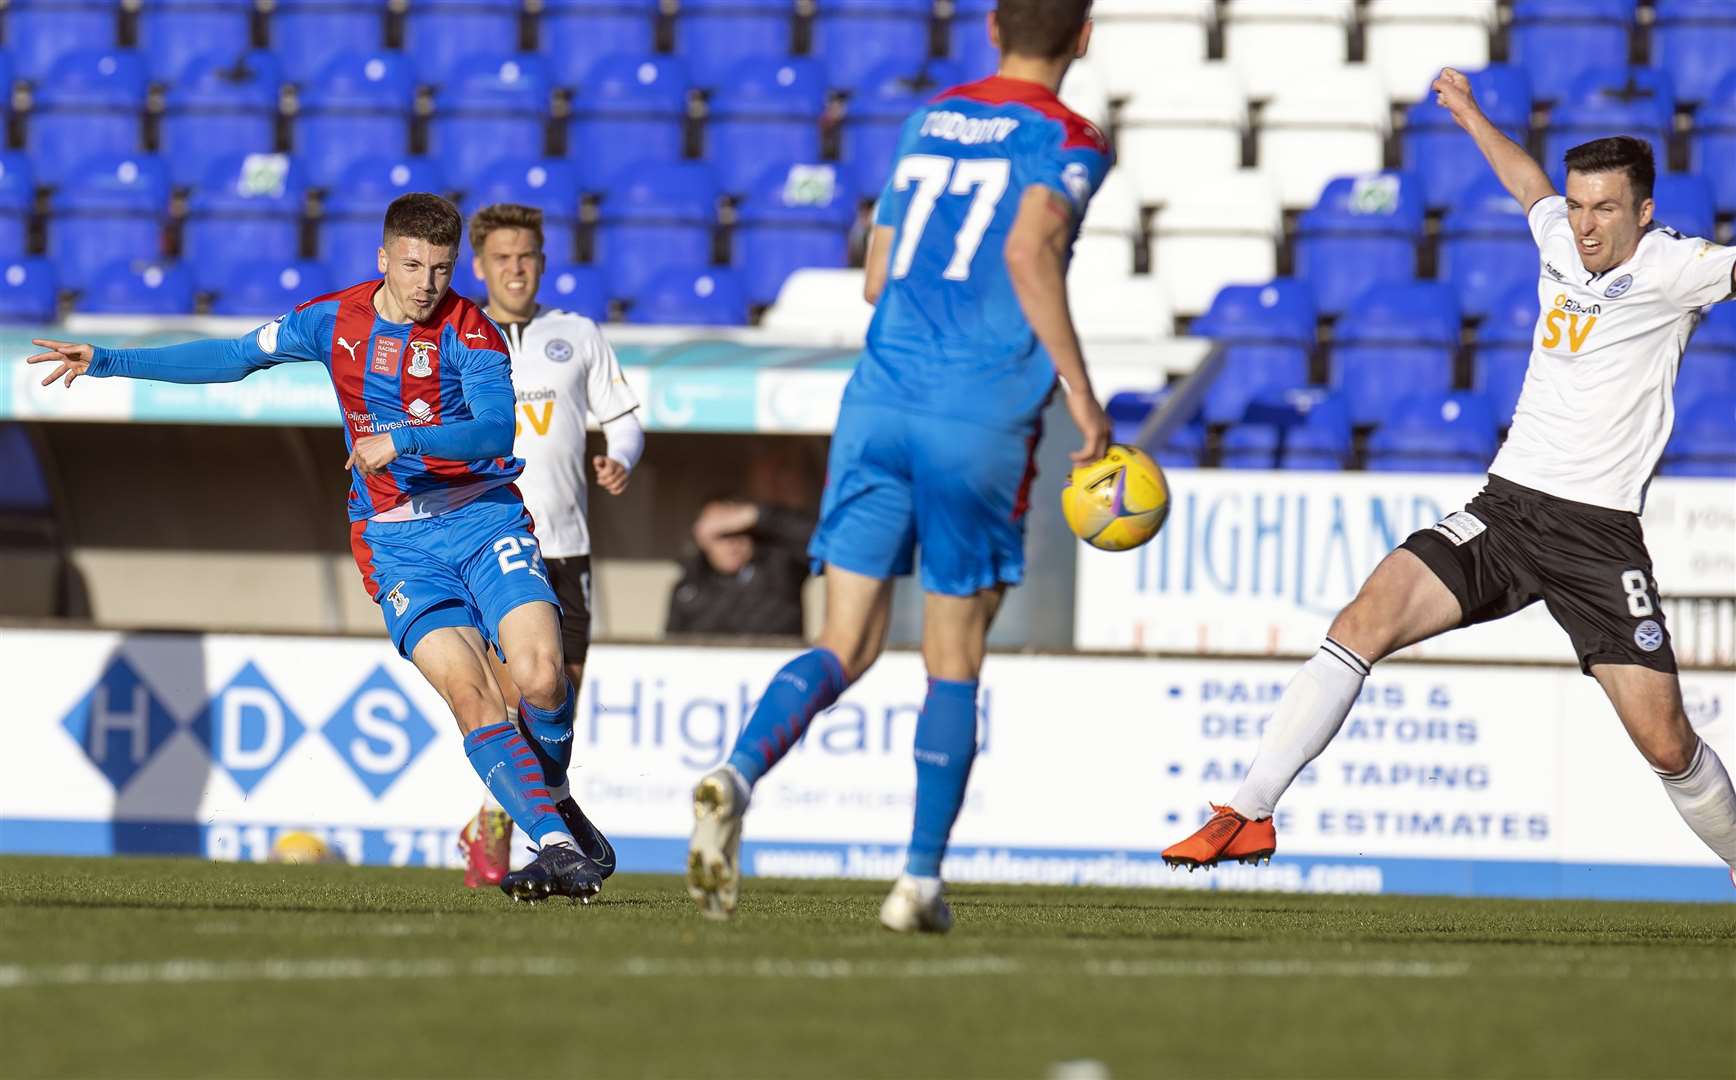 Picture - Ken Macpherson, Inverness. Inverness CT(1) v Ayr United(1). 24.10.19. ICT’s Daniel Mackay gets a shot on goal past Ayr’s Michael Miller.